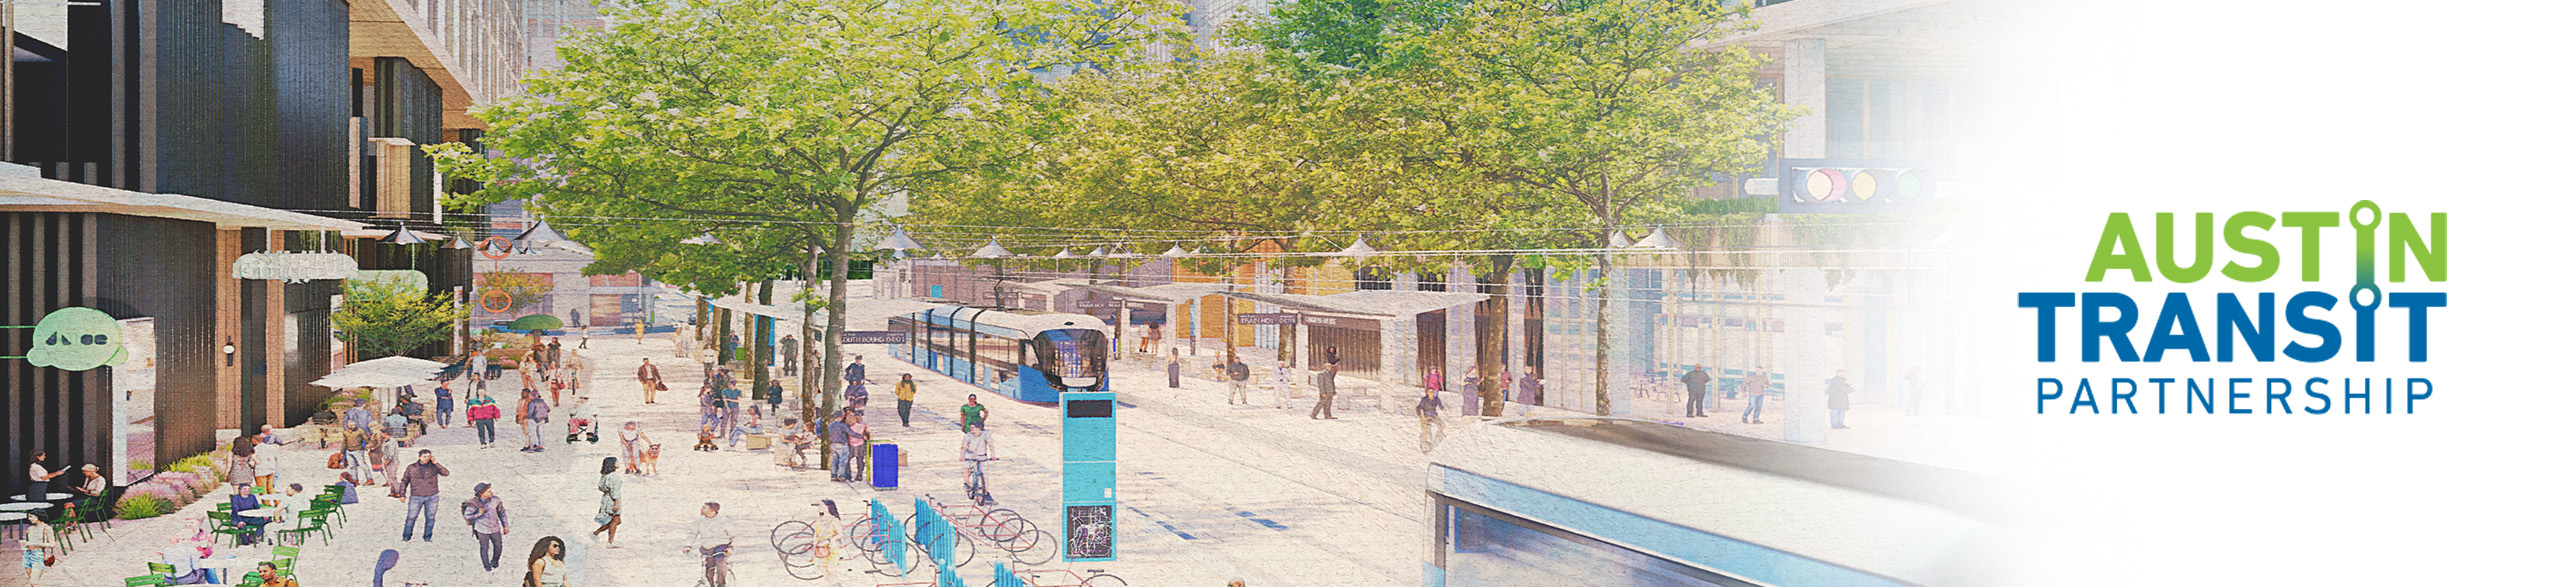 Artist conceptual rendering of light rail on 'The Drag'